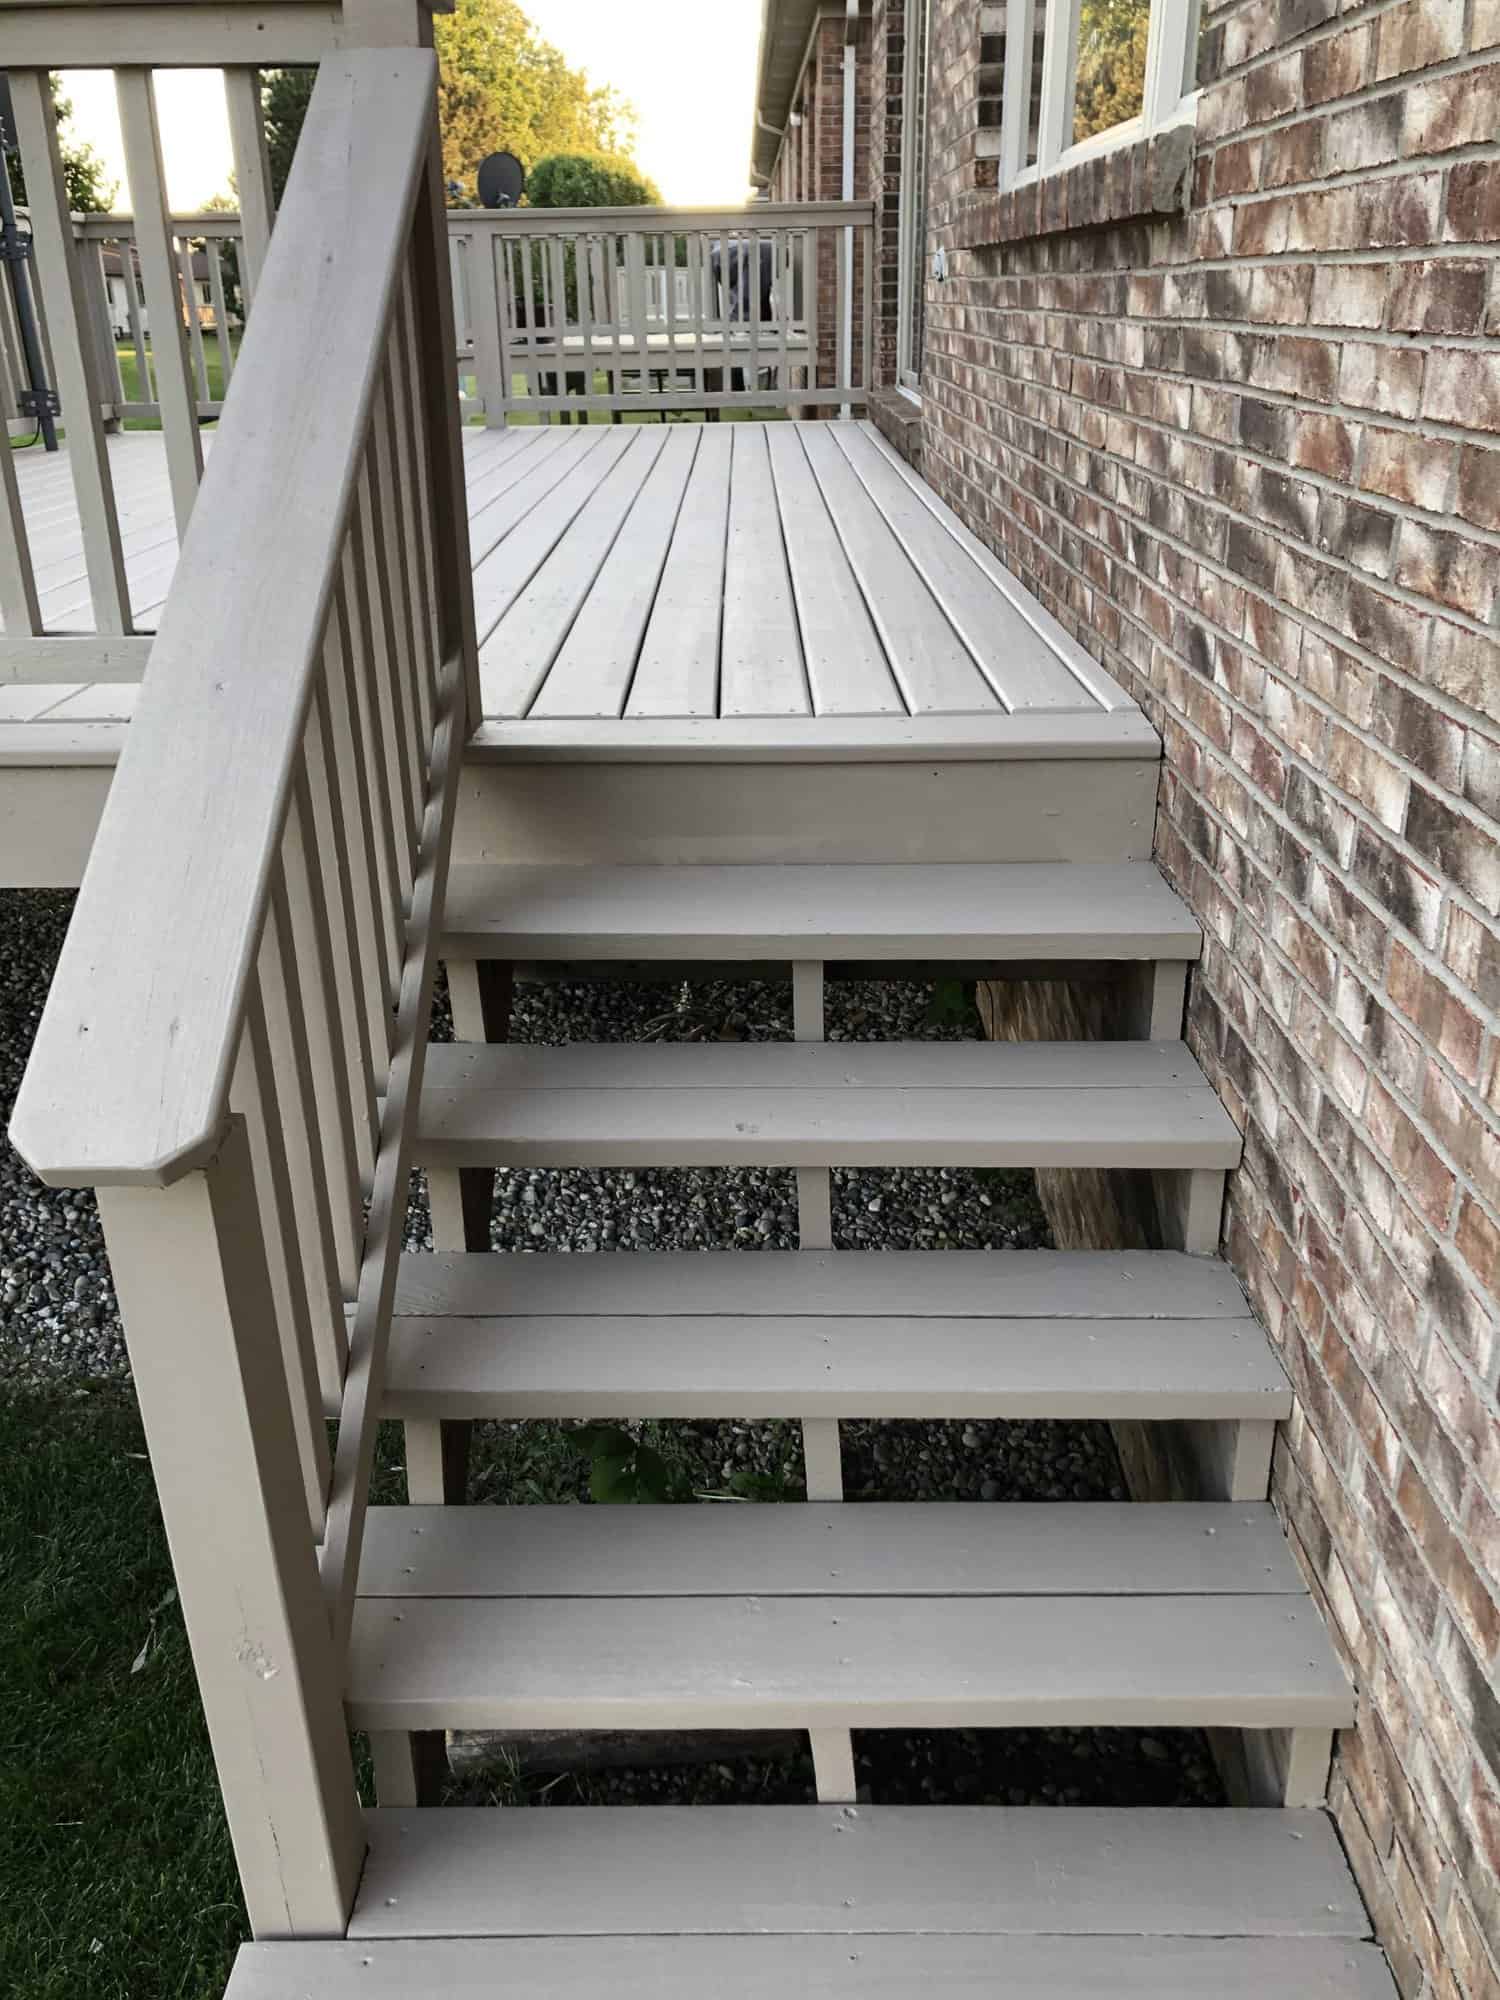 Deck and Fence Painting